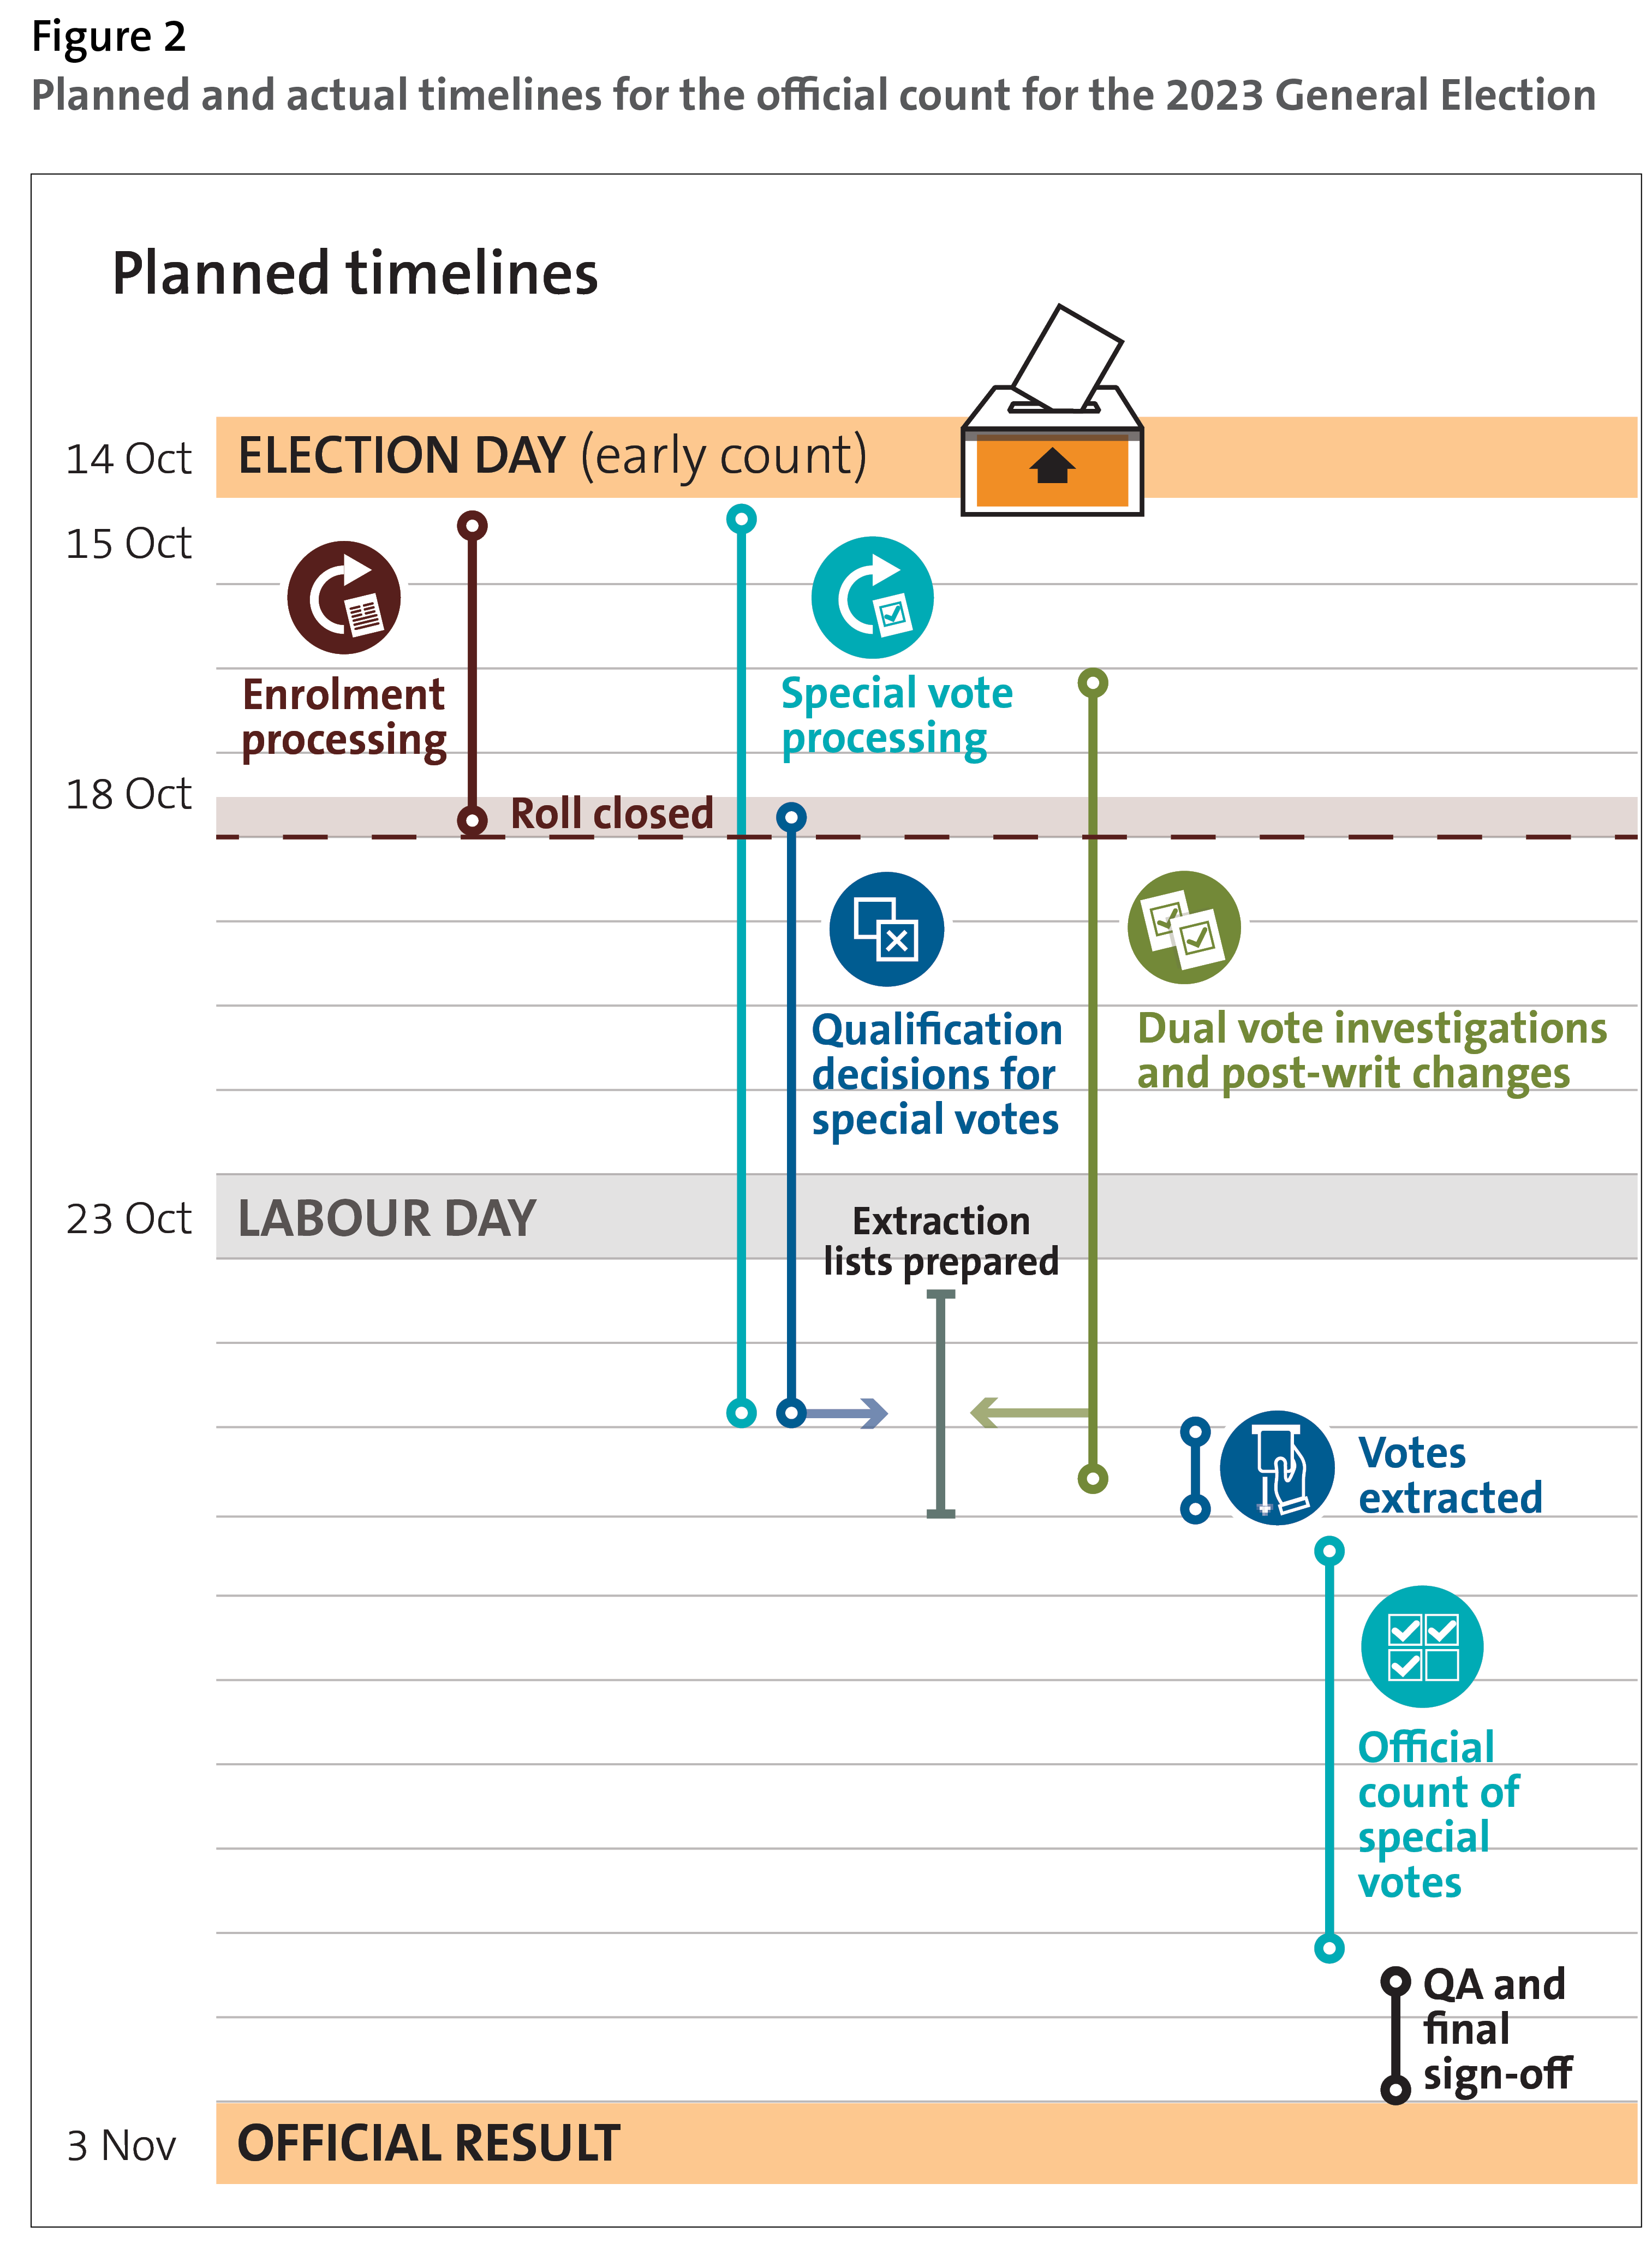 Figure 2 - Planned timelines for the official count for the 2023 General Election